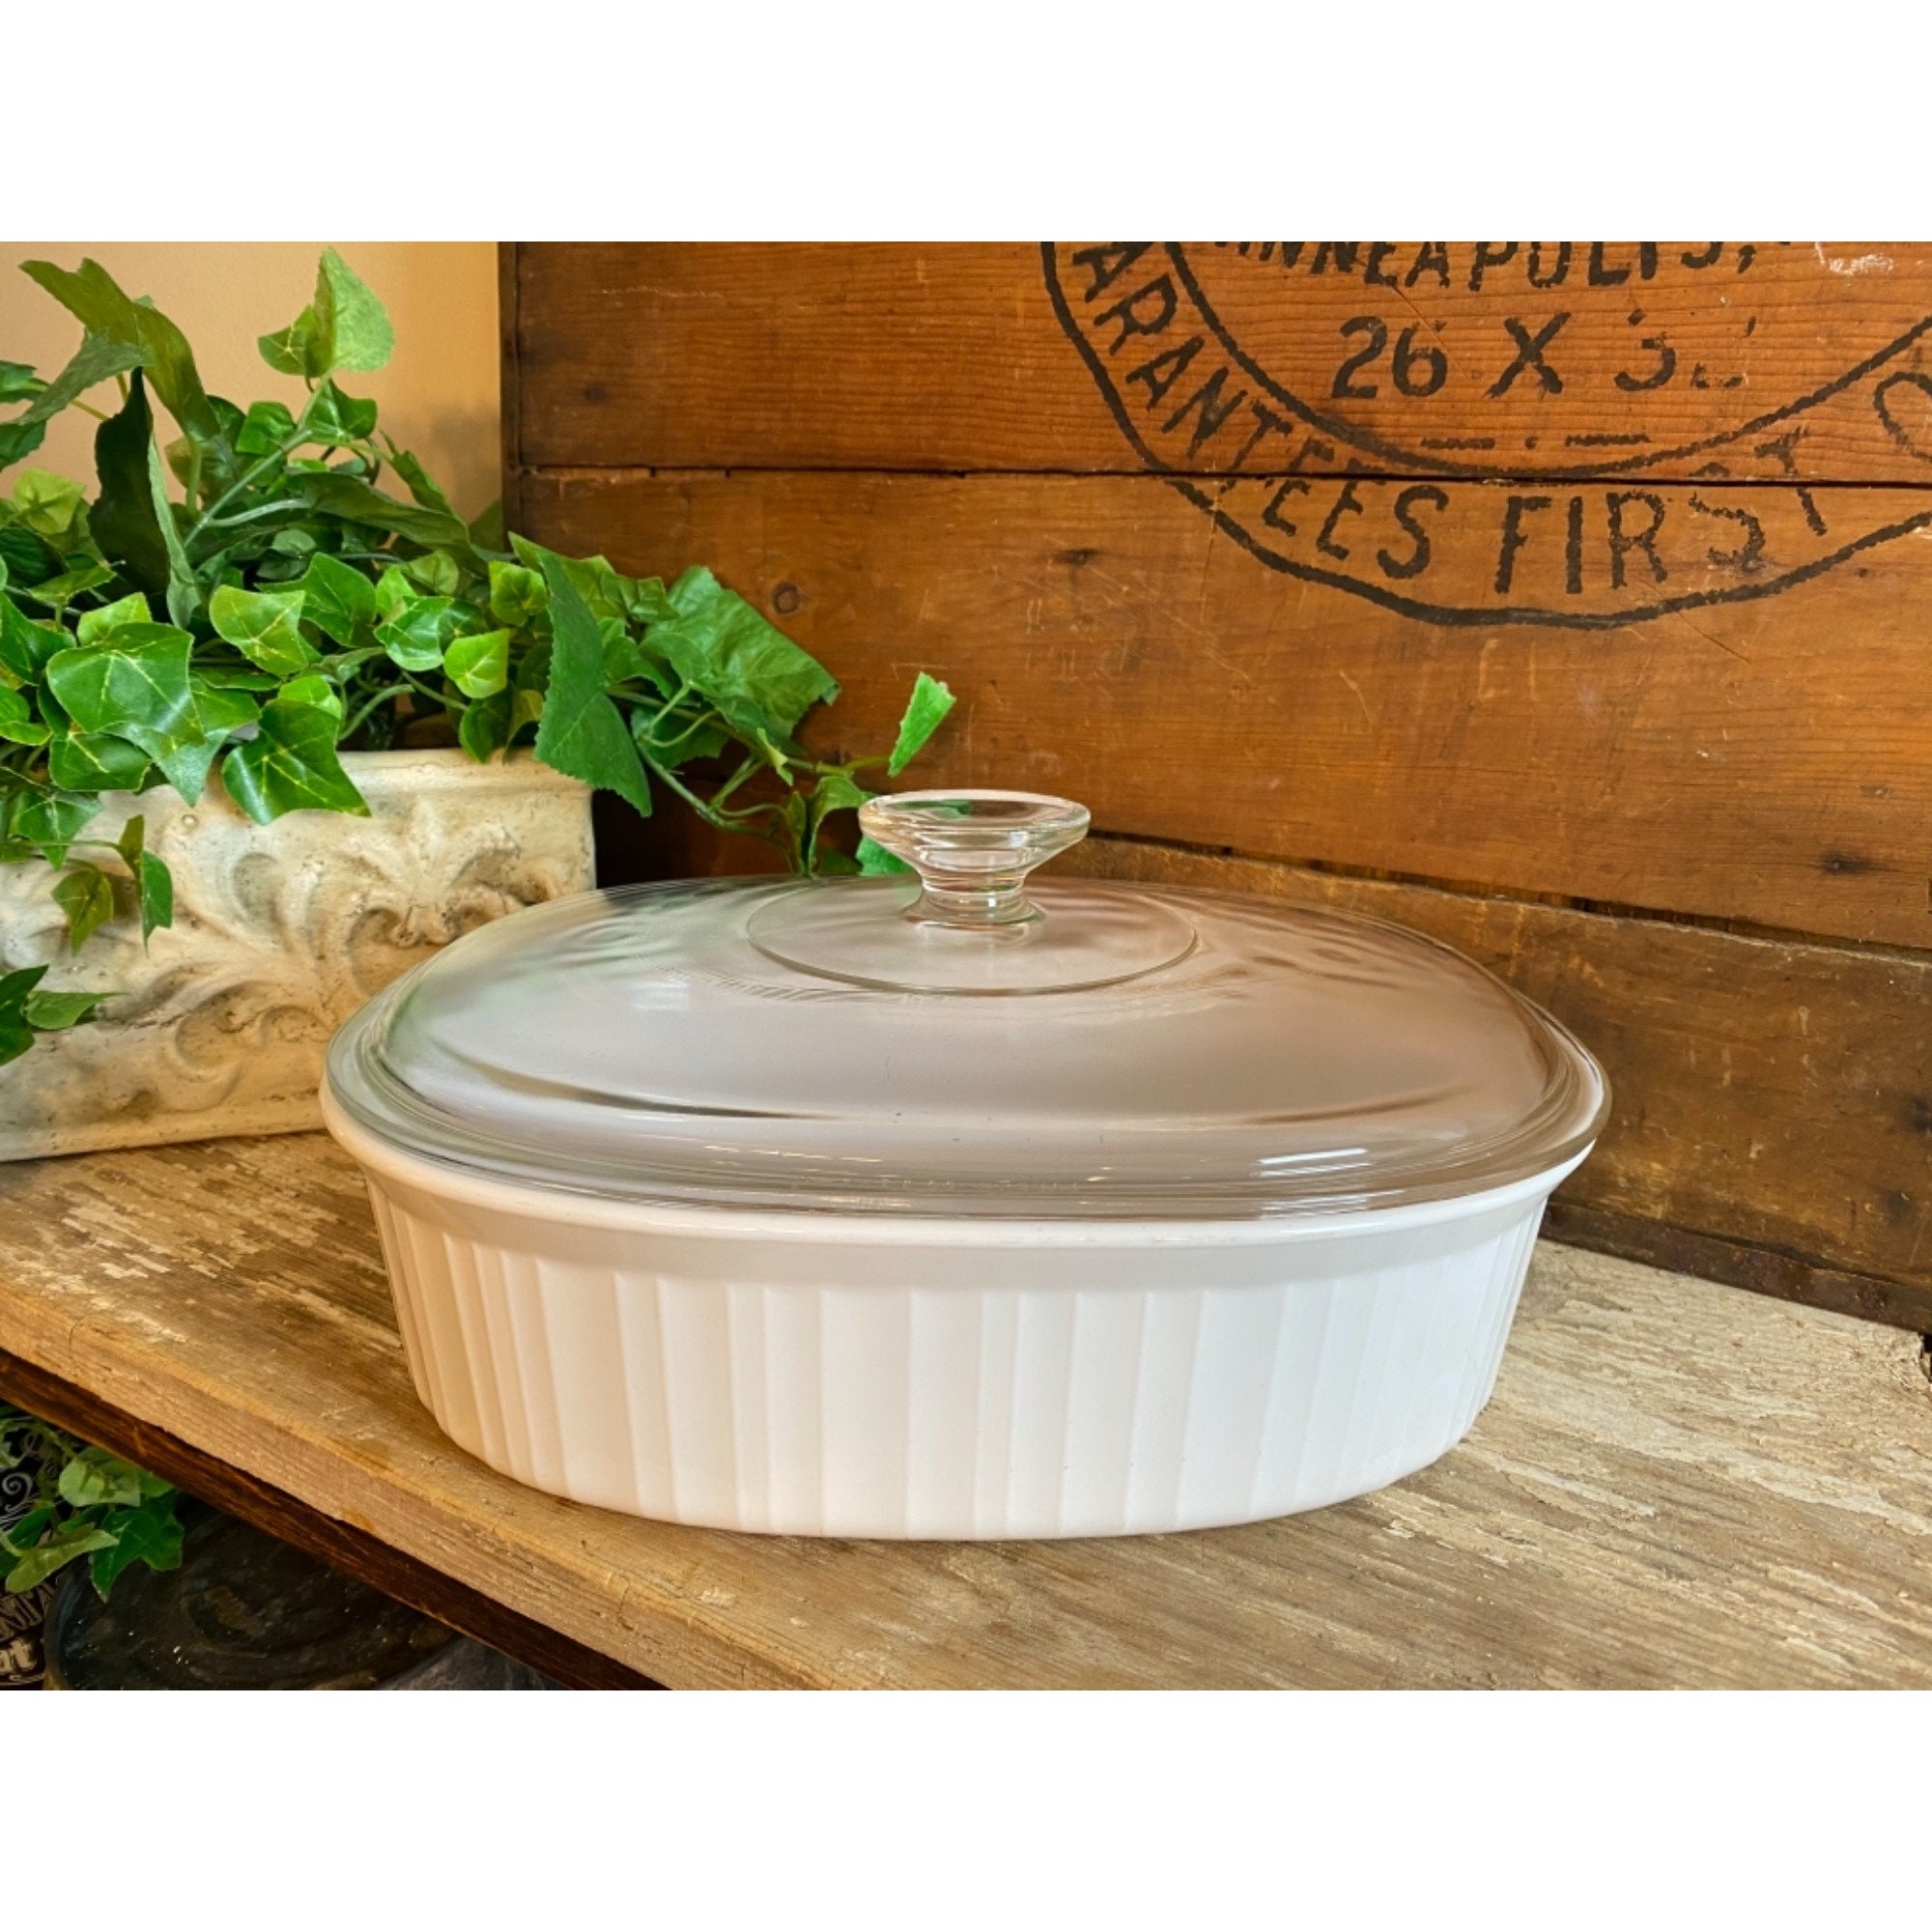 Casserole Dish with Lid, Ceramic 2.8 QT Baking Dish for Cooking, Porcelain  9X13